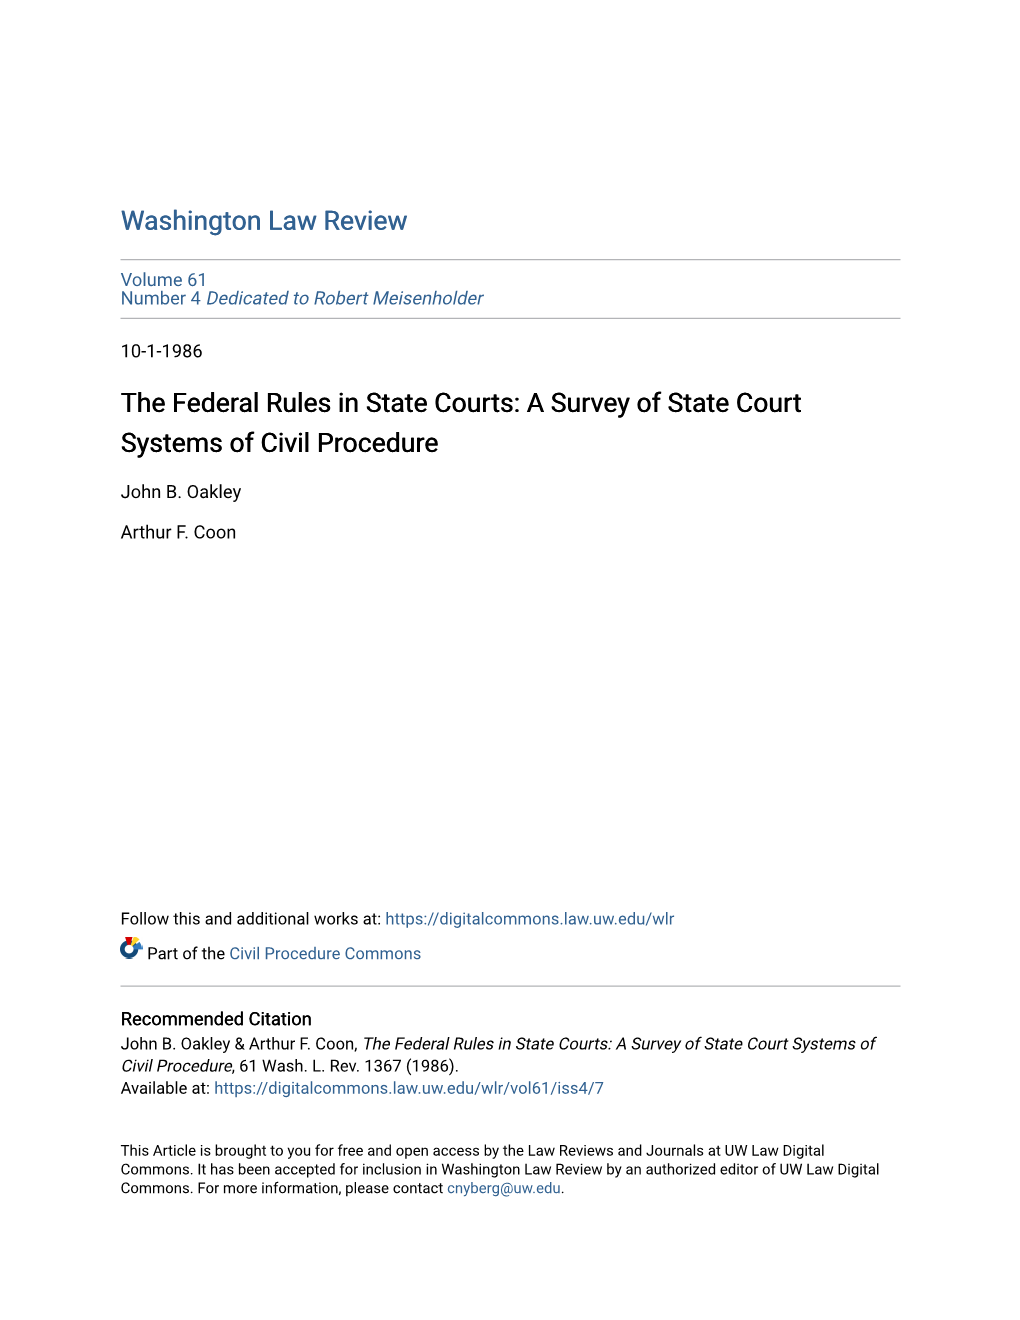 The Federal Rules in State Courts: a Survey of State Court Systems of Civil Procedure